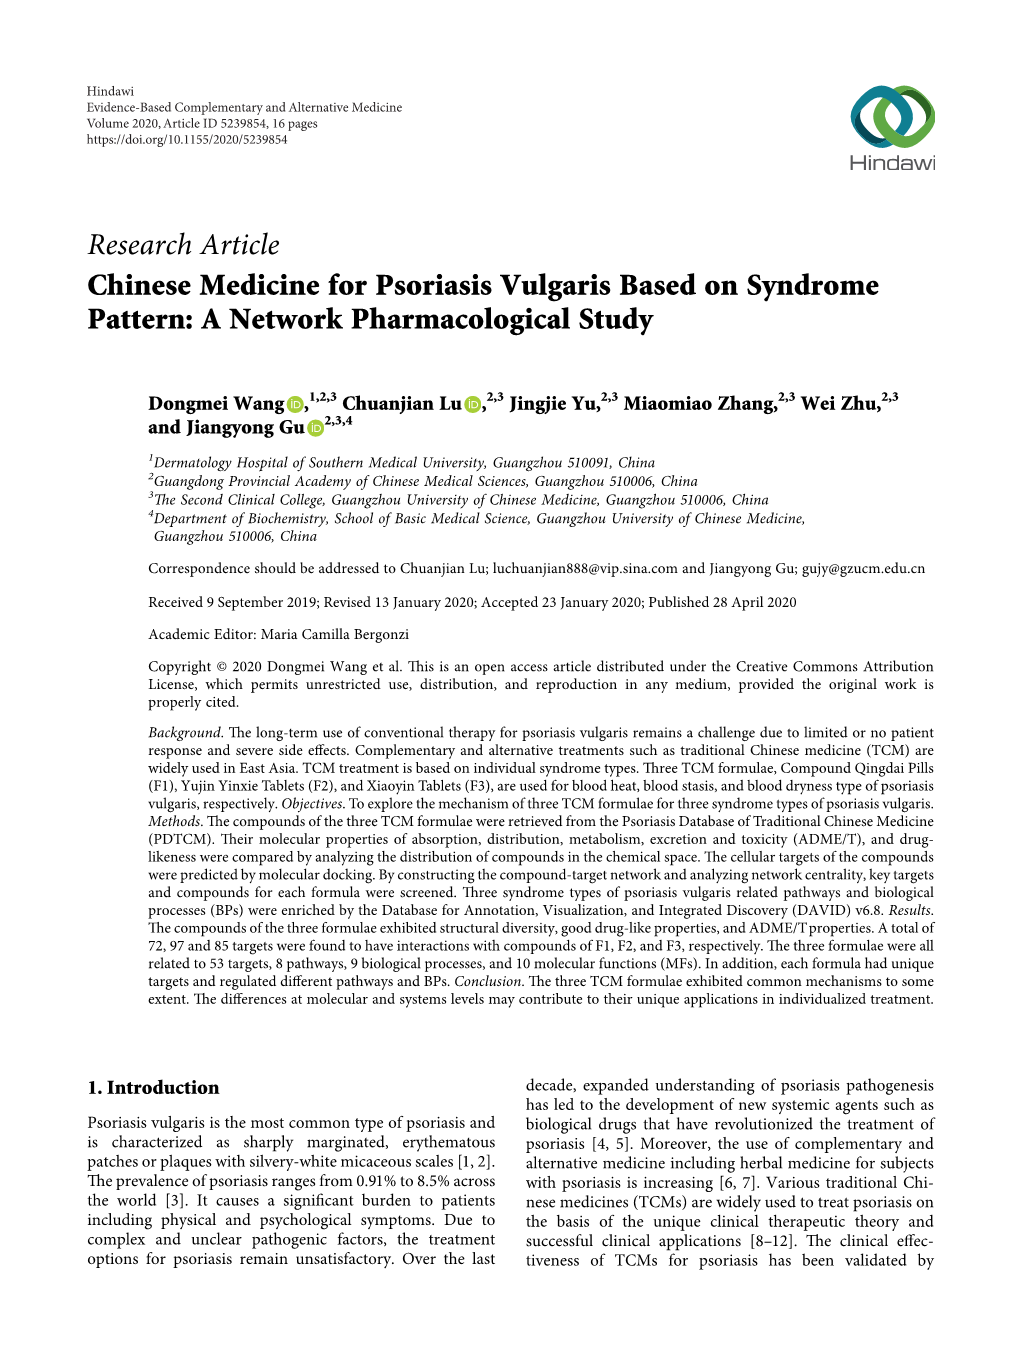 Chinese Medicine for Psoriasis Vulgaris Based on Syndrome Pattern: a Network Pharmacological Study